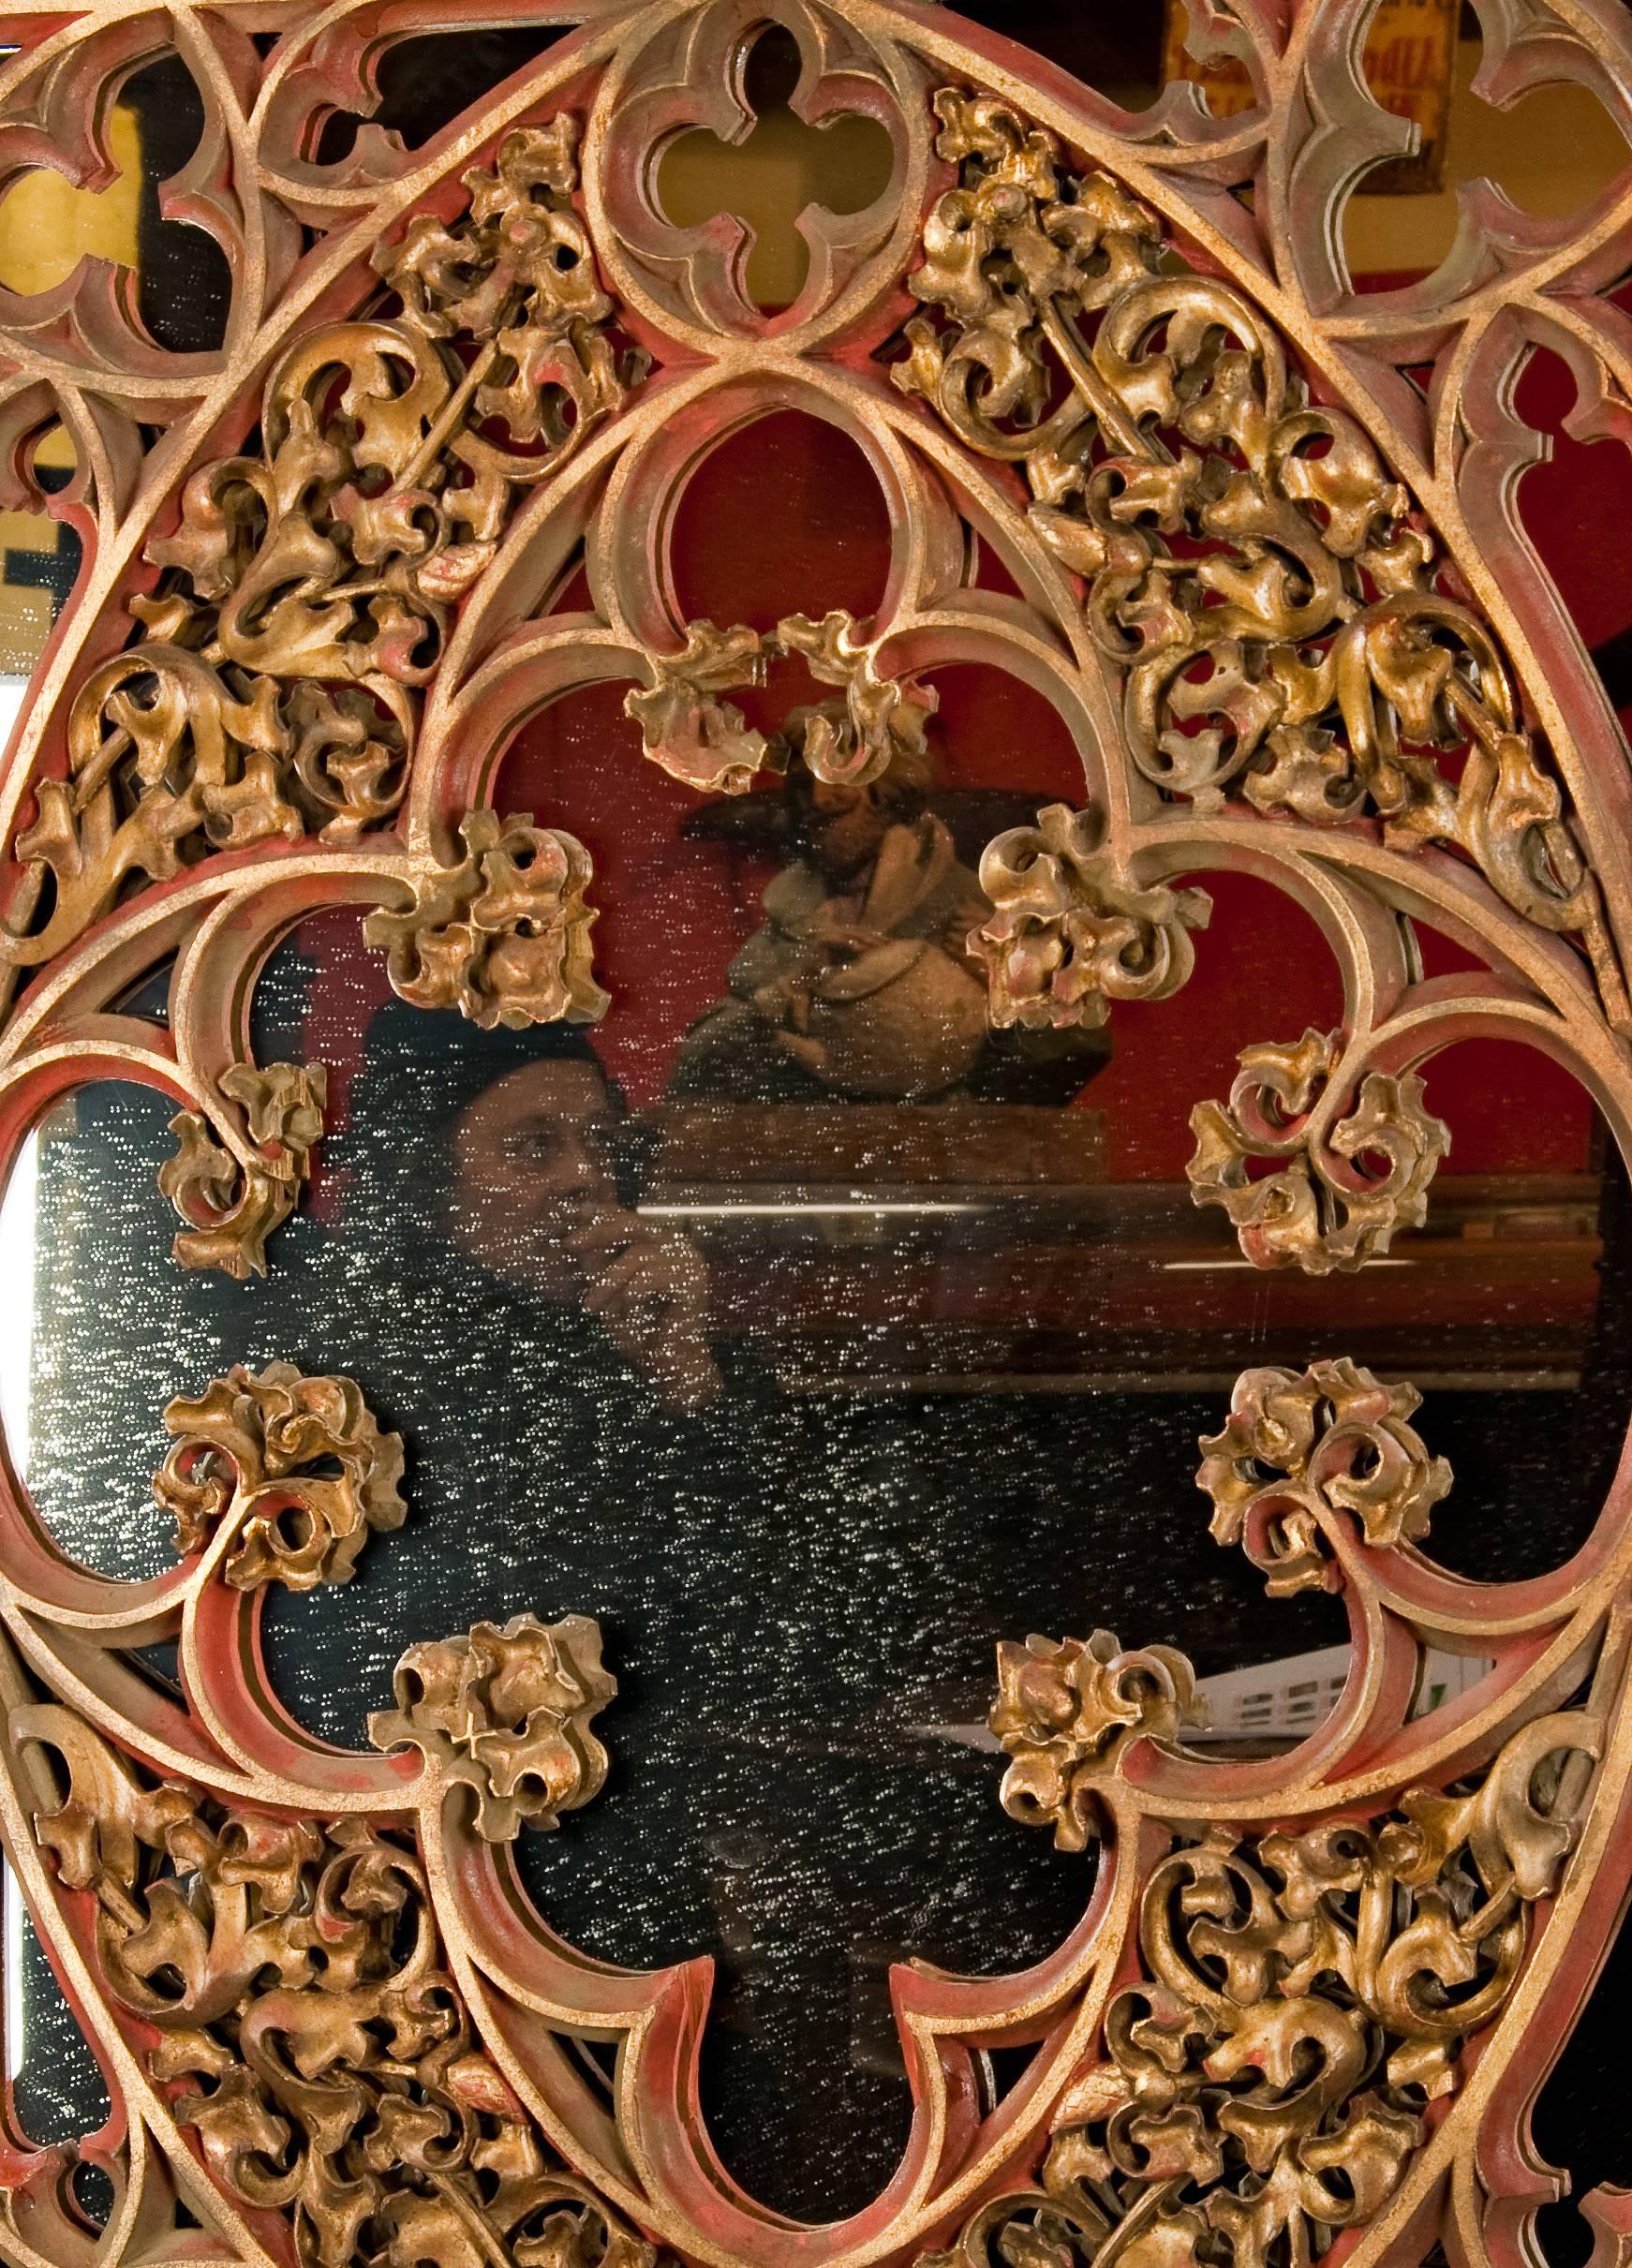 Neo-Gothic mirror, open-worked carved and painted wood. Executed, circa 1890. Framing and backplane replaced.